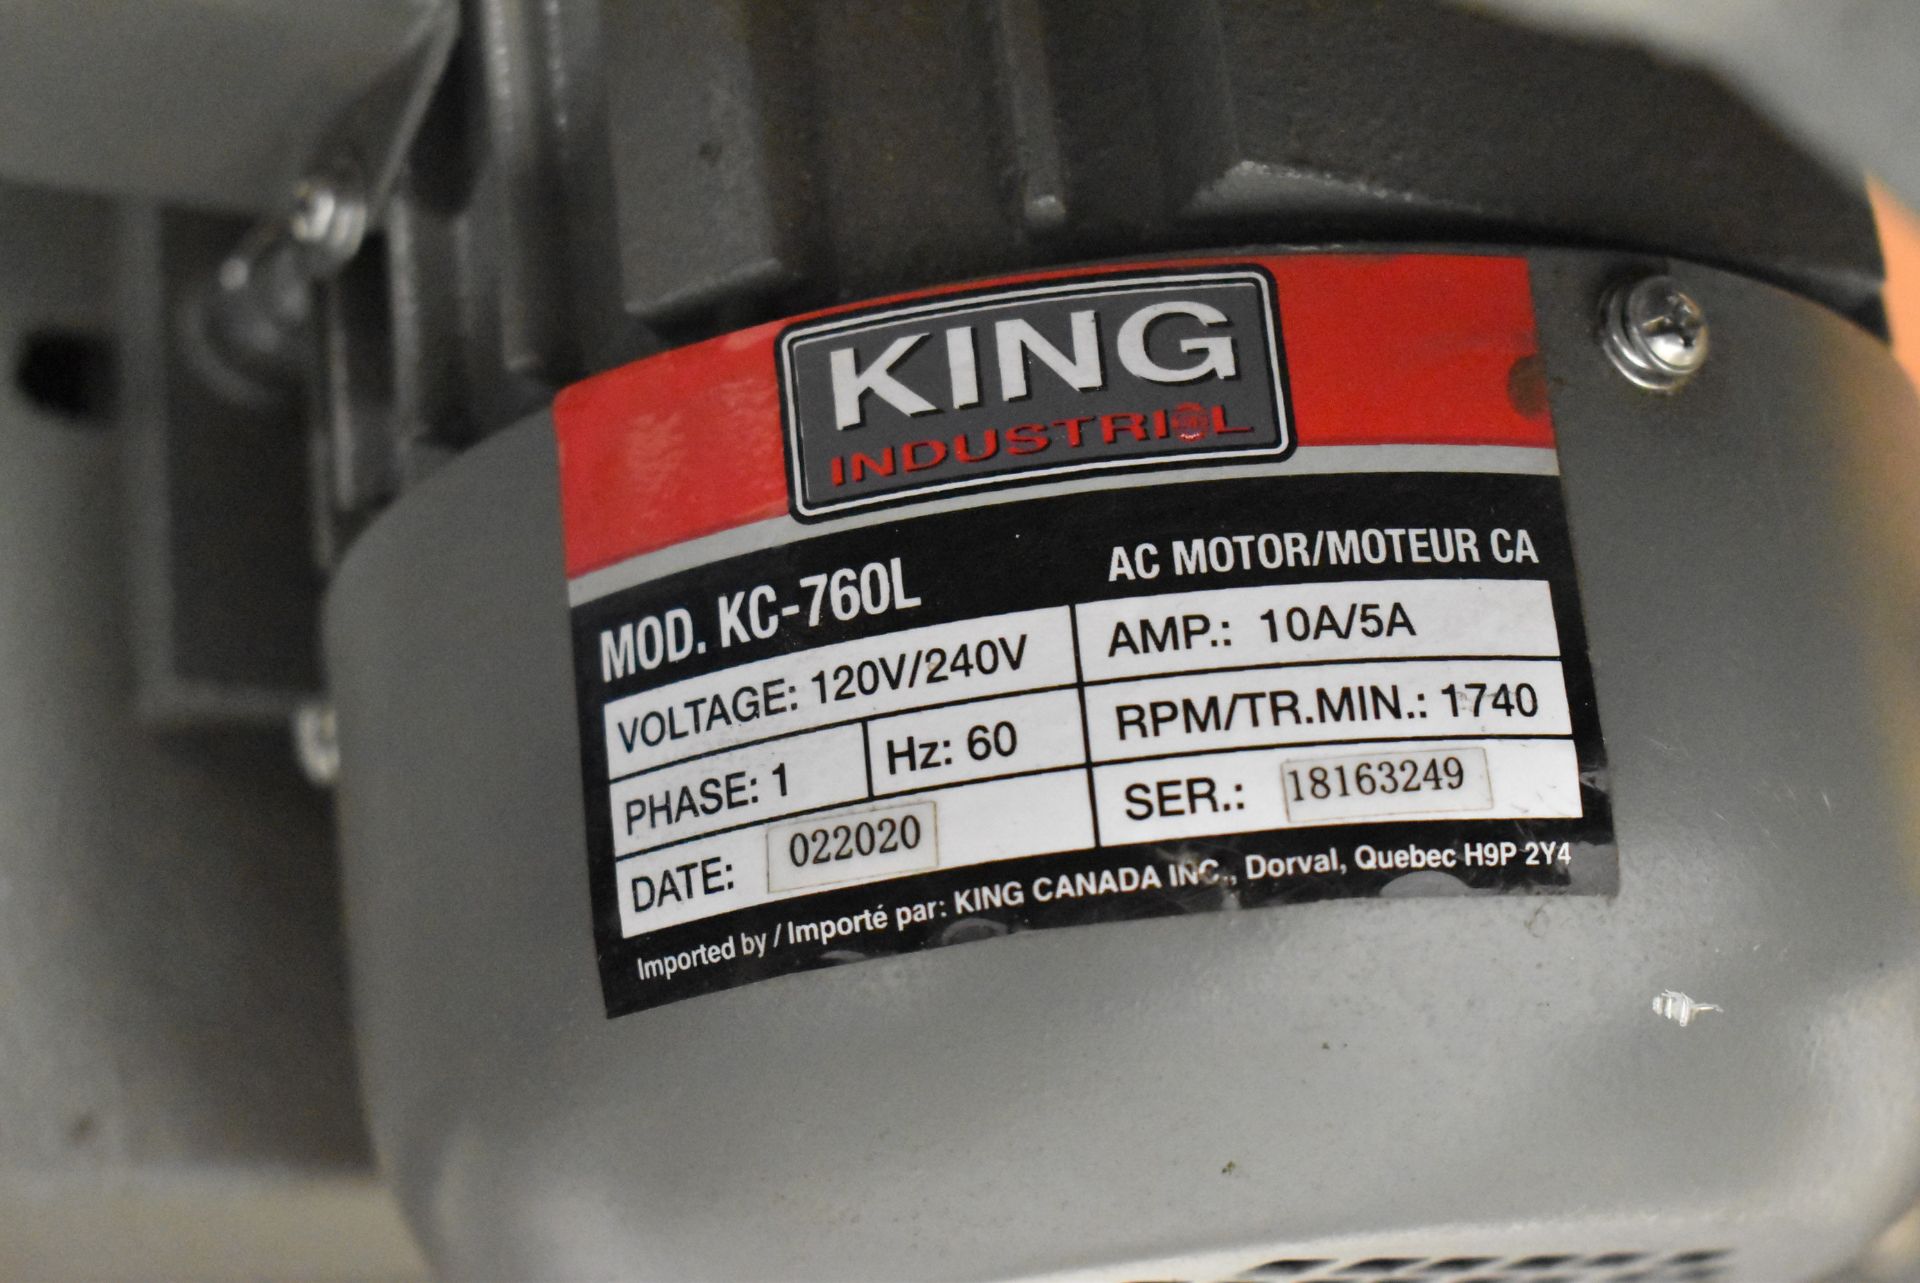 KING INDUSTRIAL (2020) KC-760L COMBINATION SANDER WITH 6" BELT, 9" DIA. DISC, SPEEDS TO 1740 RPM, - Image 3 of 4